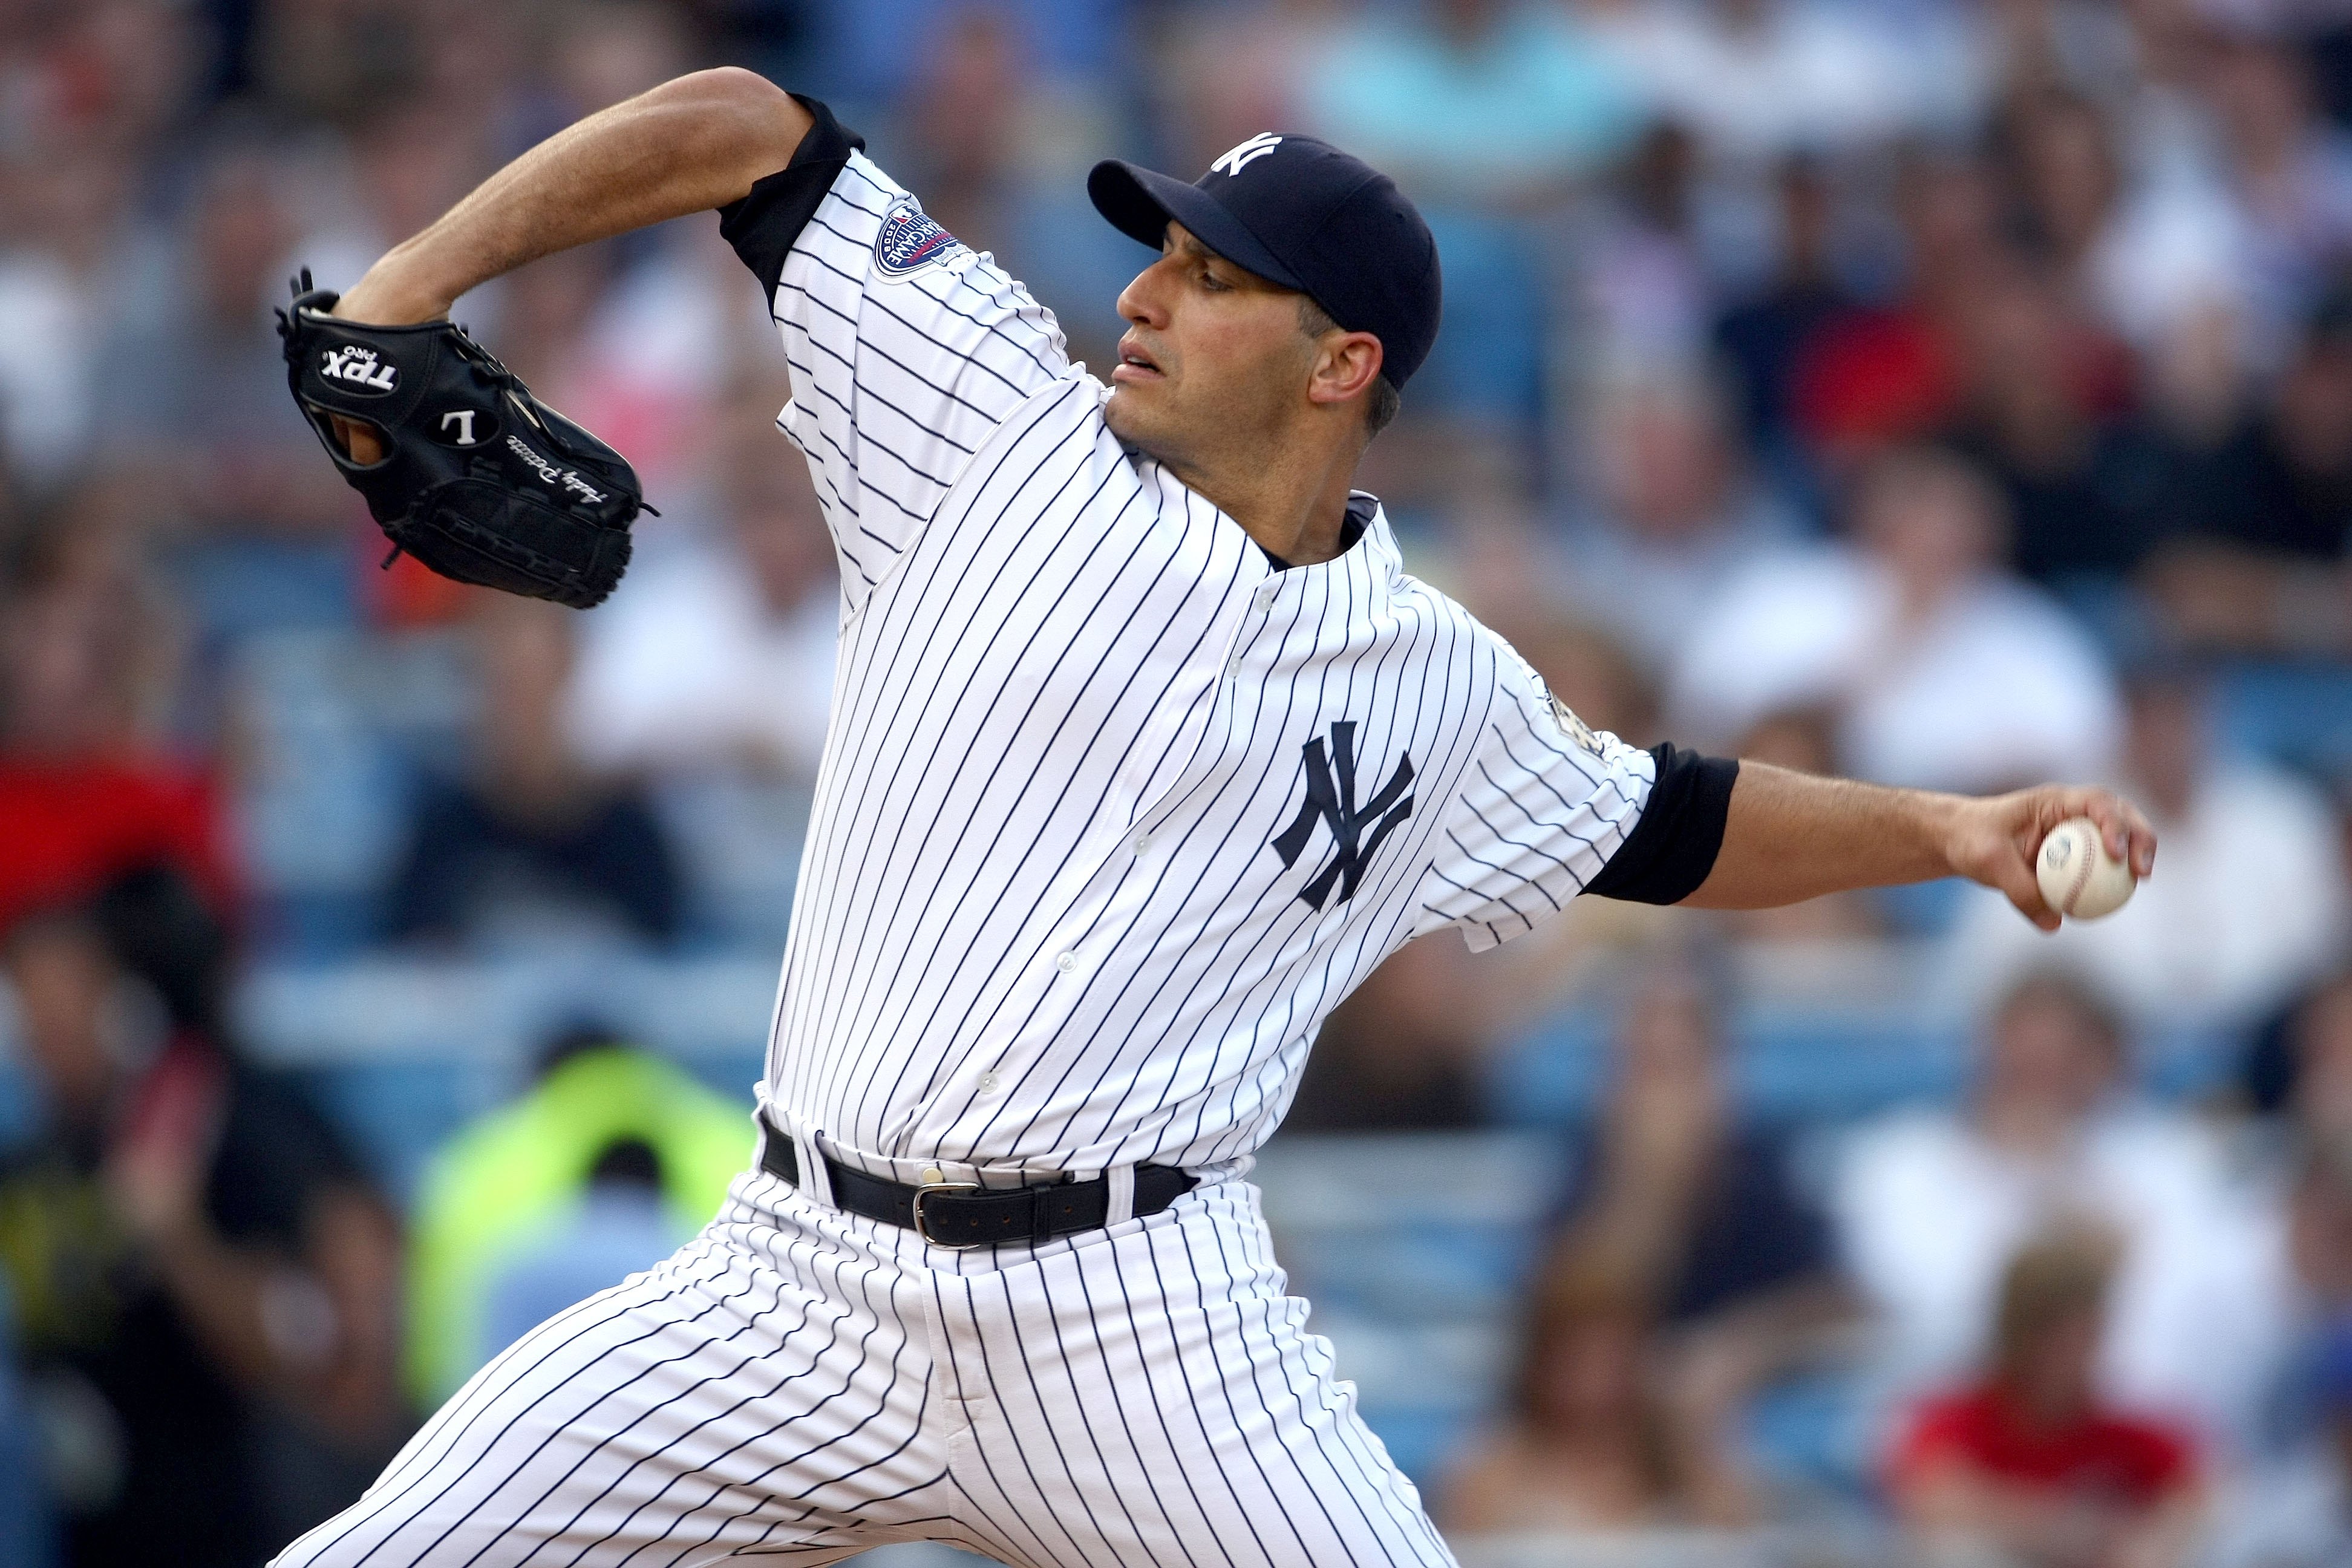 Yankees pitcher Andy Pettitte to retire at end of season, New York Yankees